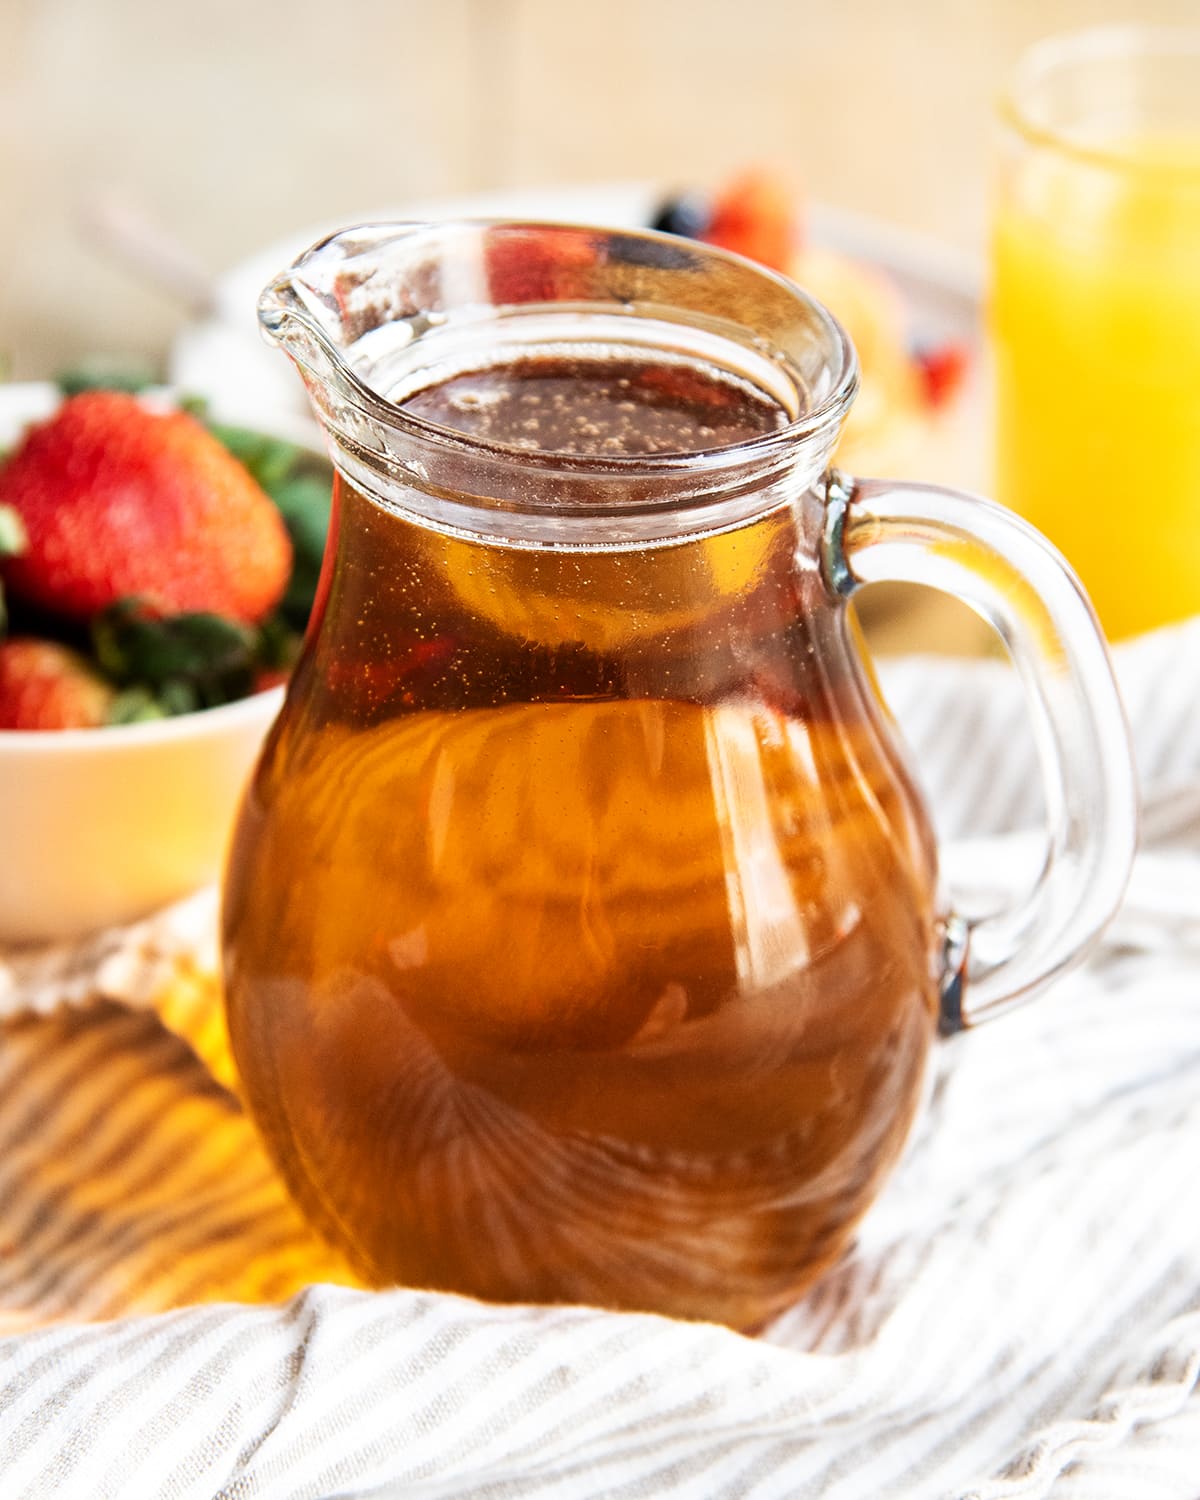 A glass pitcher of maple flavored syrup.